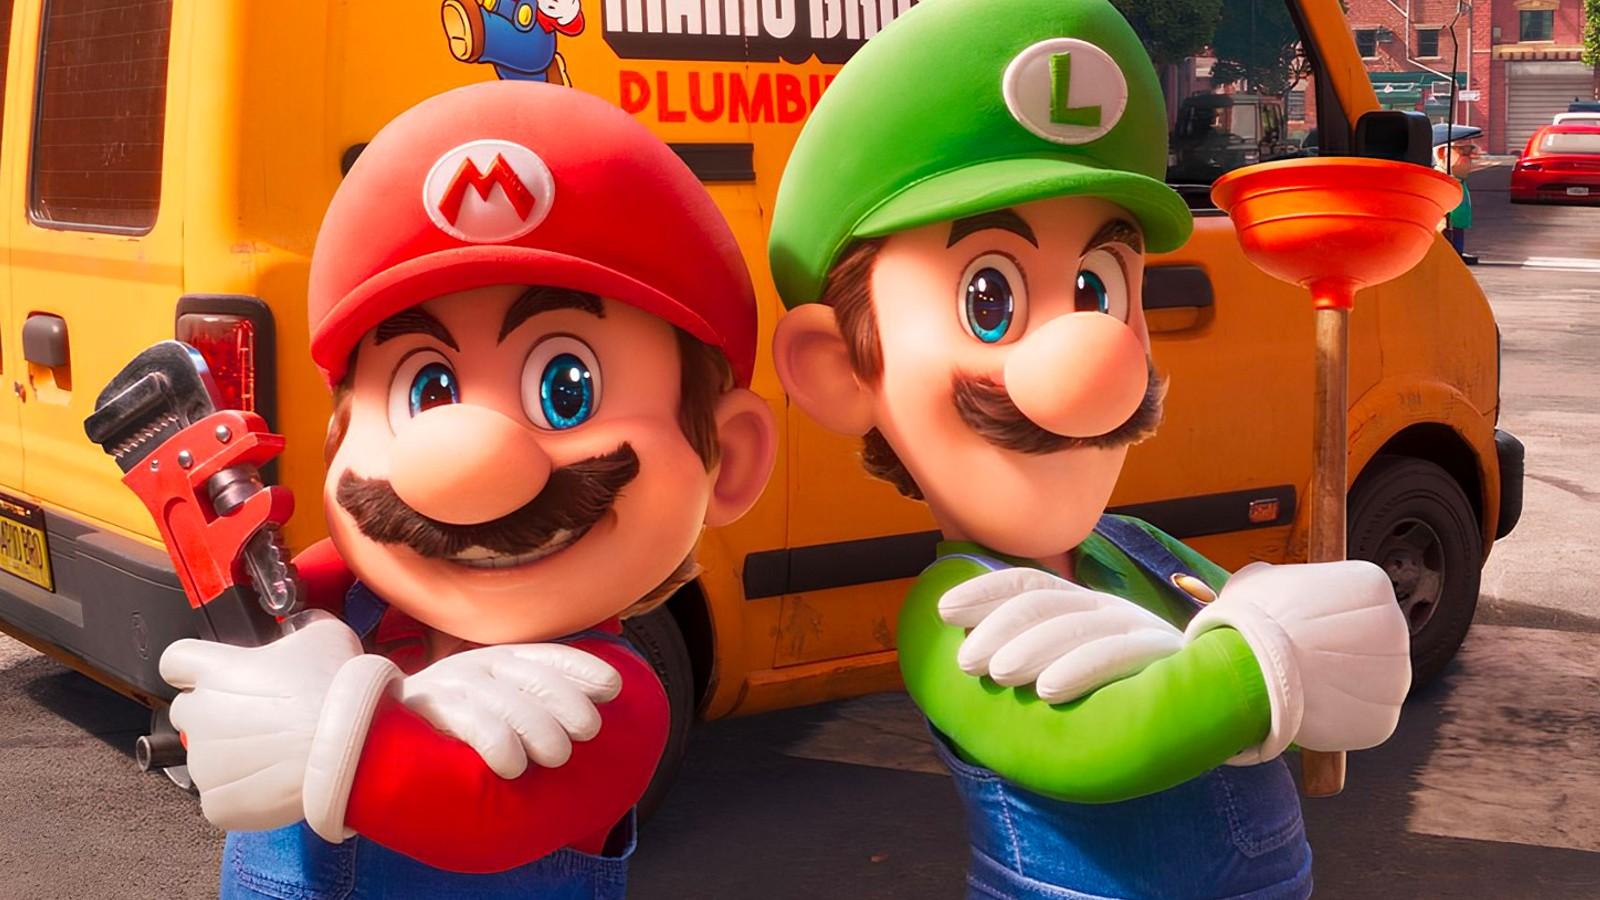 Super Mario Bros. Movie Now Available To Buy Or Rent Digitally